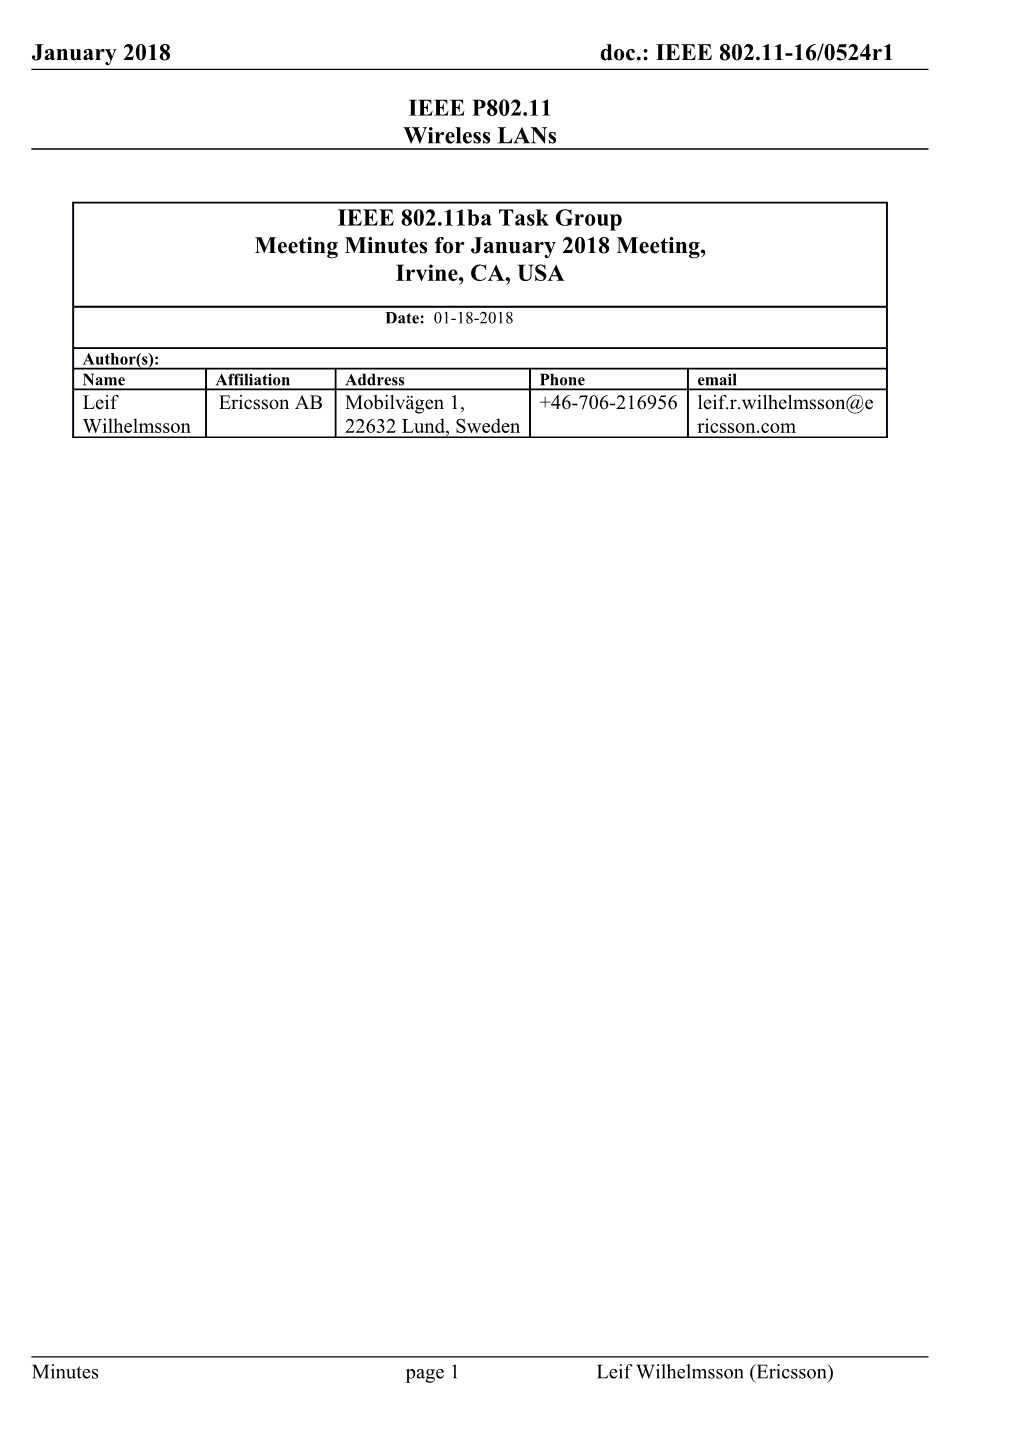 Themeeting Agenda Is Shown Below, and Published in the Agenda Document